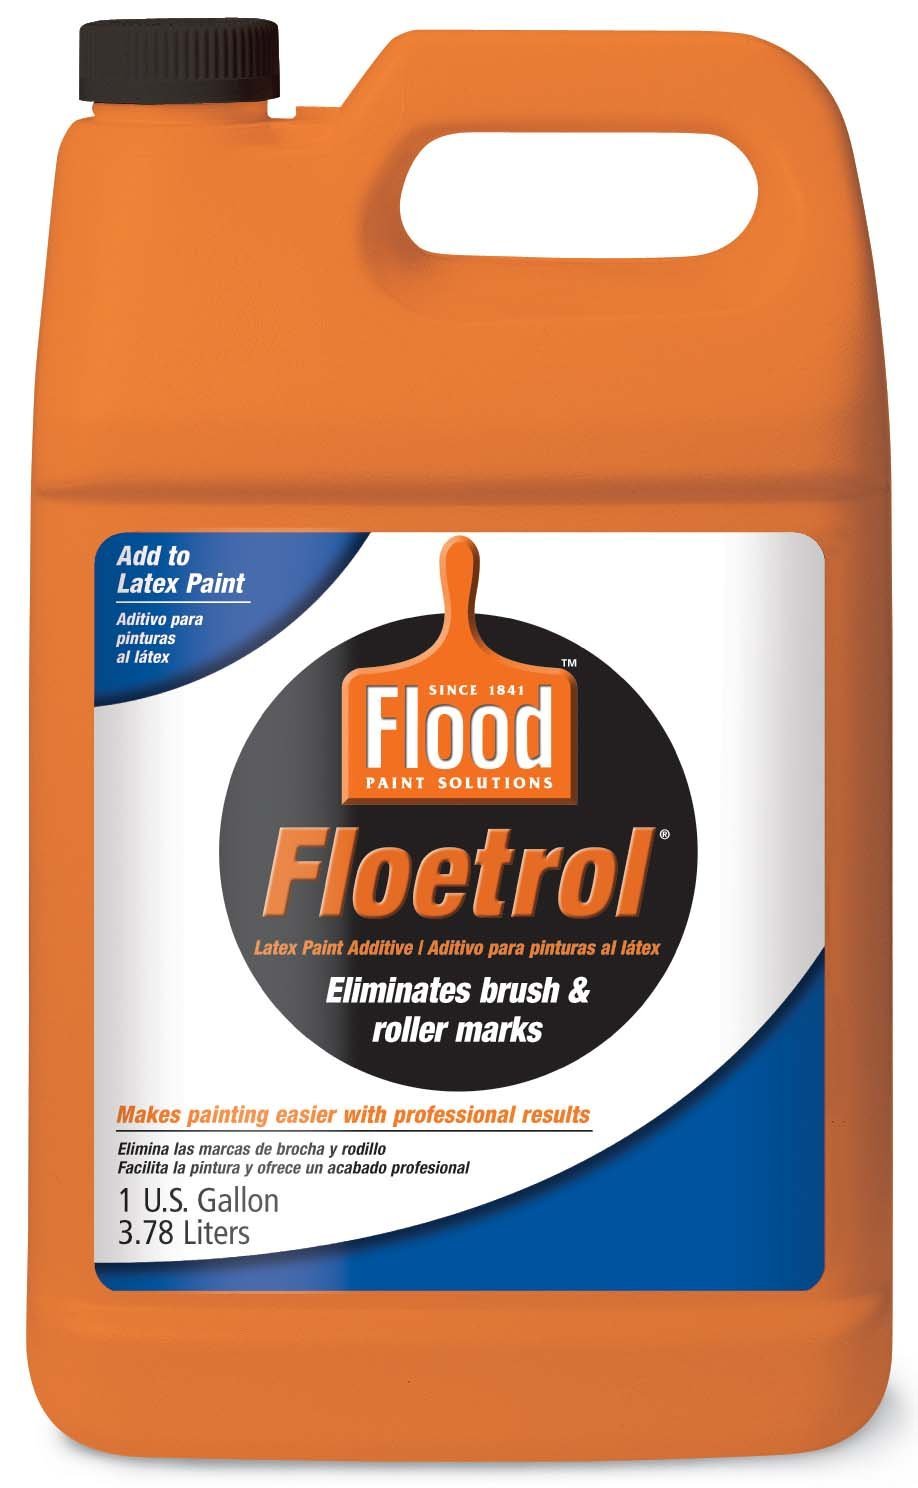 Floetrol Paint Additives Magic - A Touch of Color